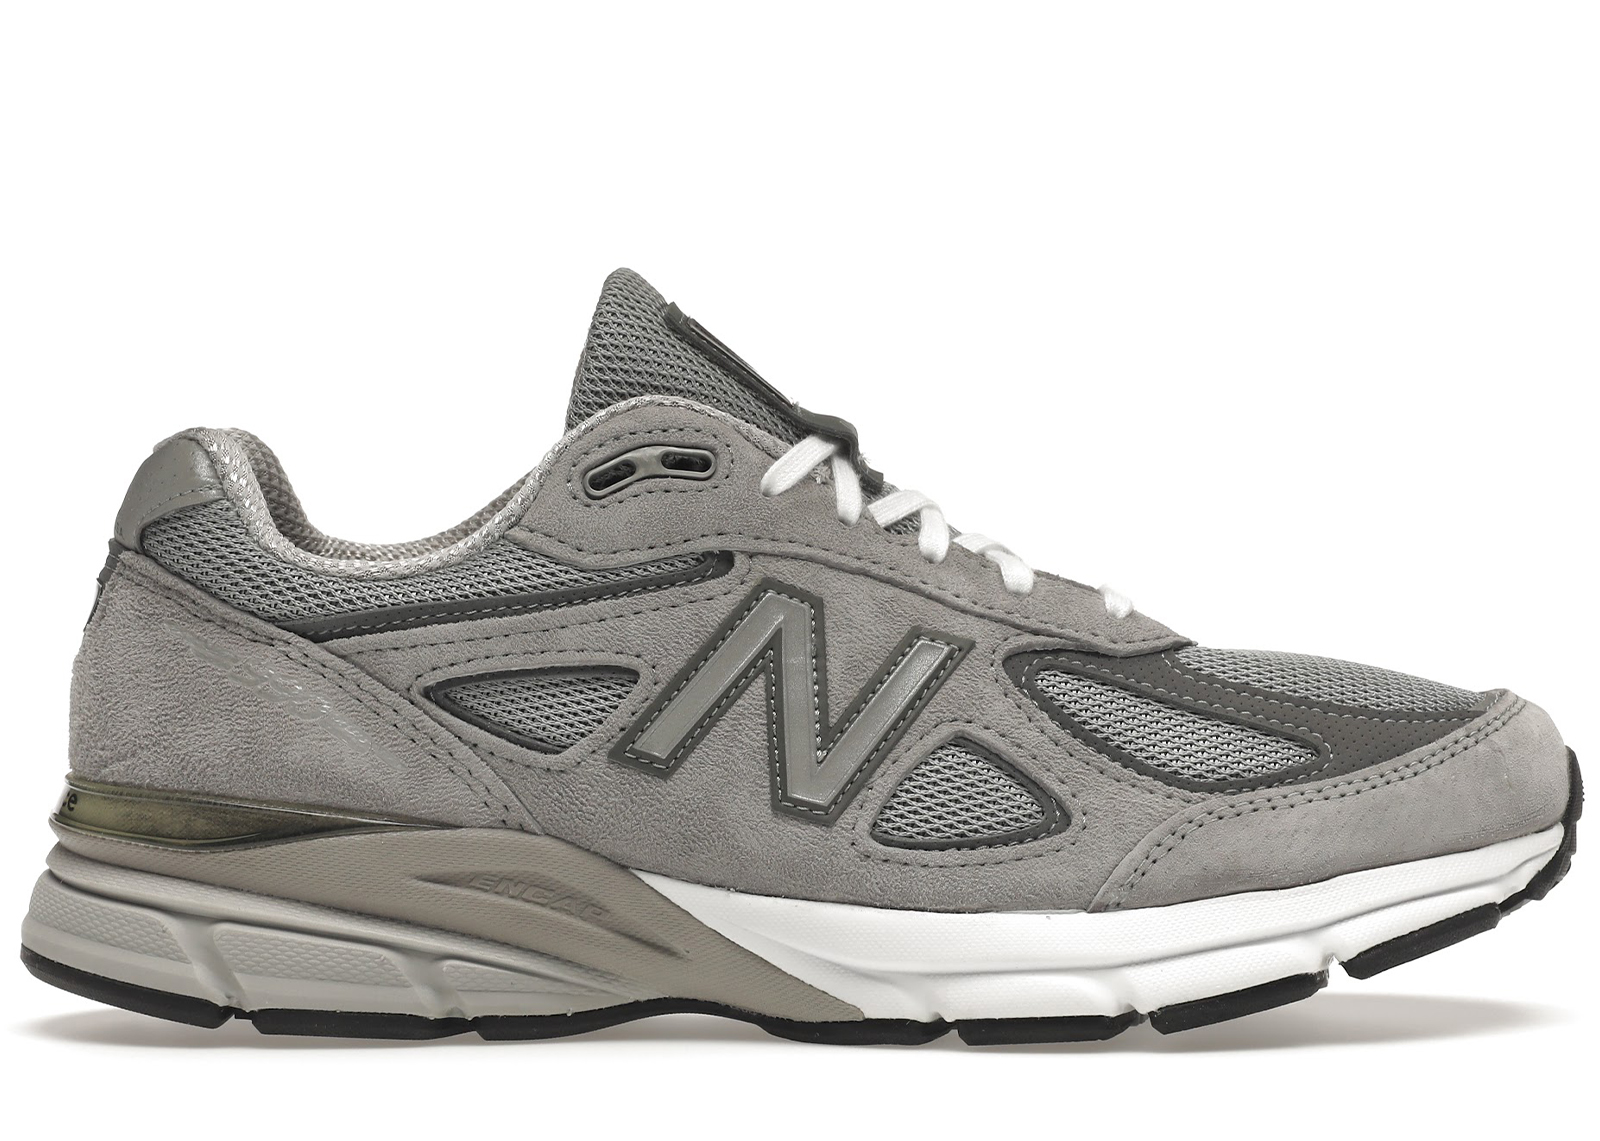 Buy New Balance 990v4 Shoes & Deadstock Sneakers